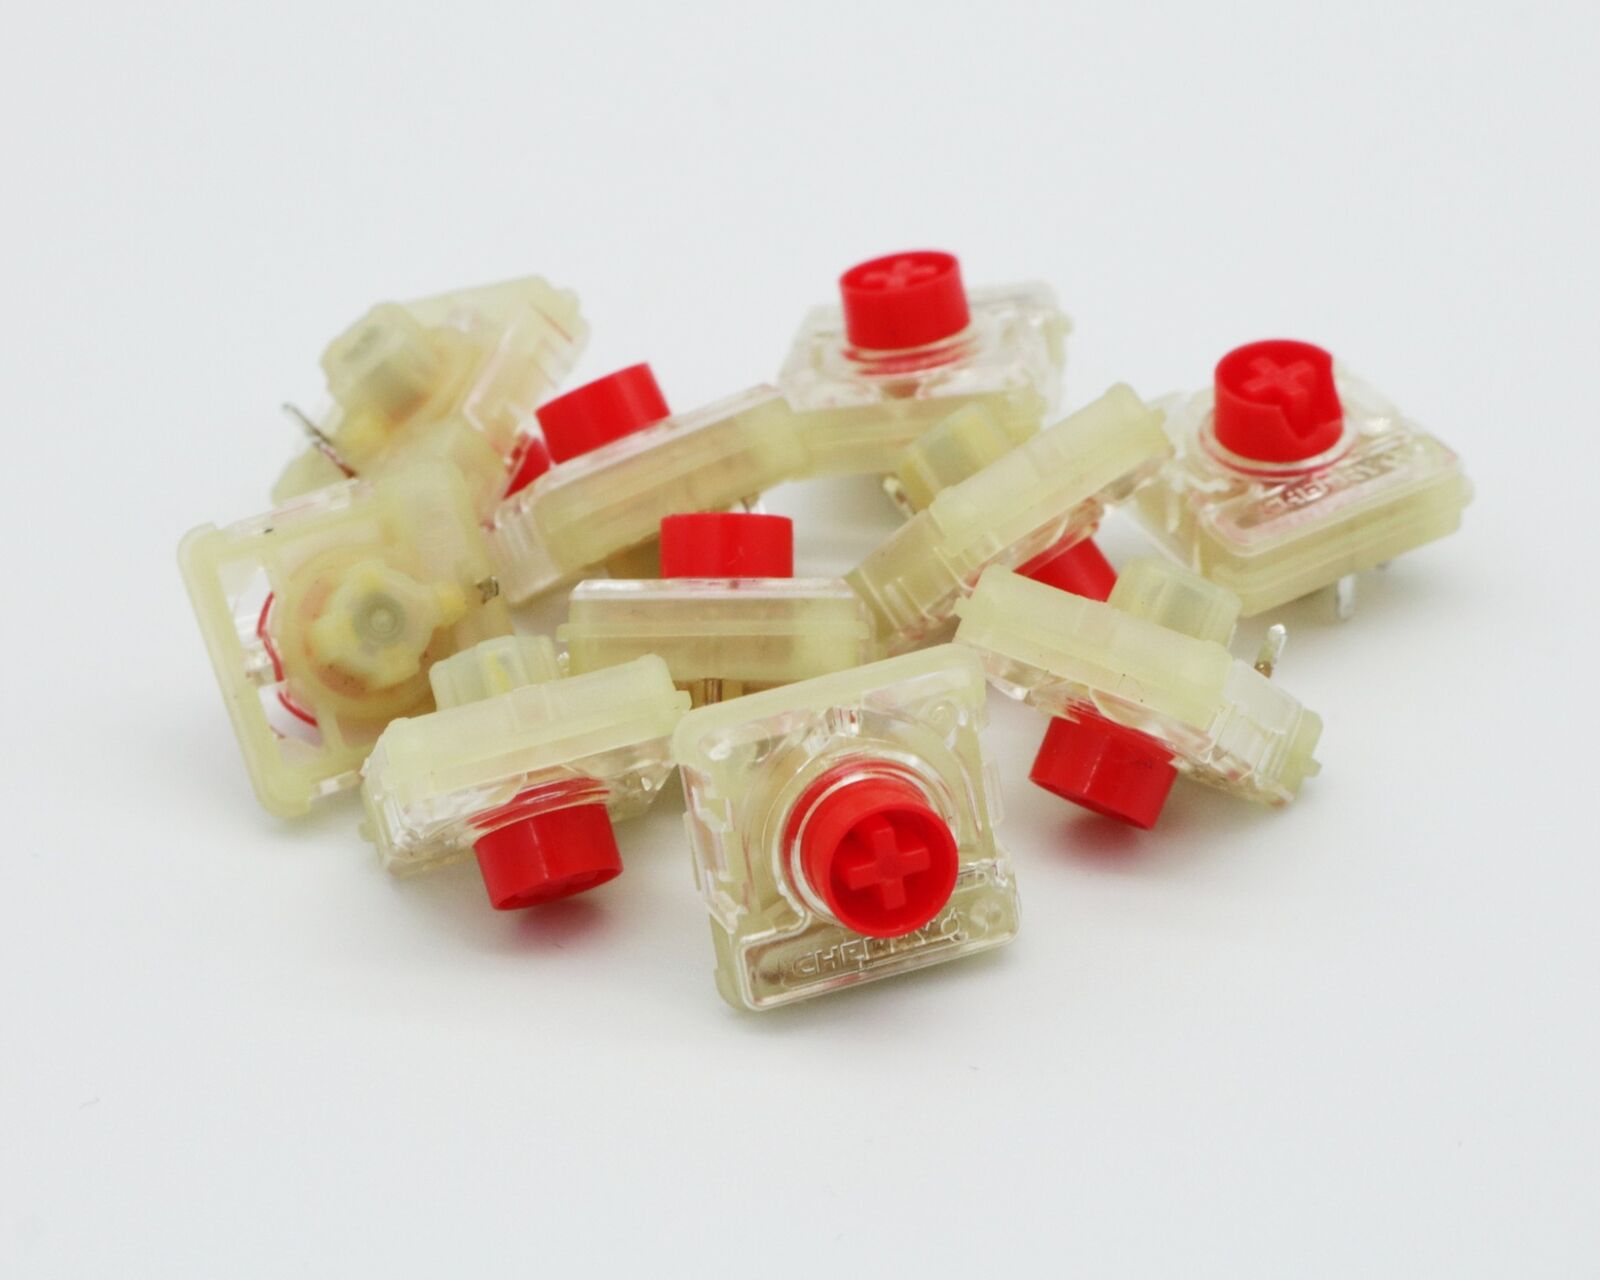 10pcs Cherry MX Low Profile RGB Red Switches Used